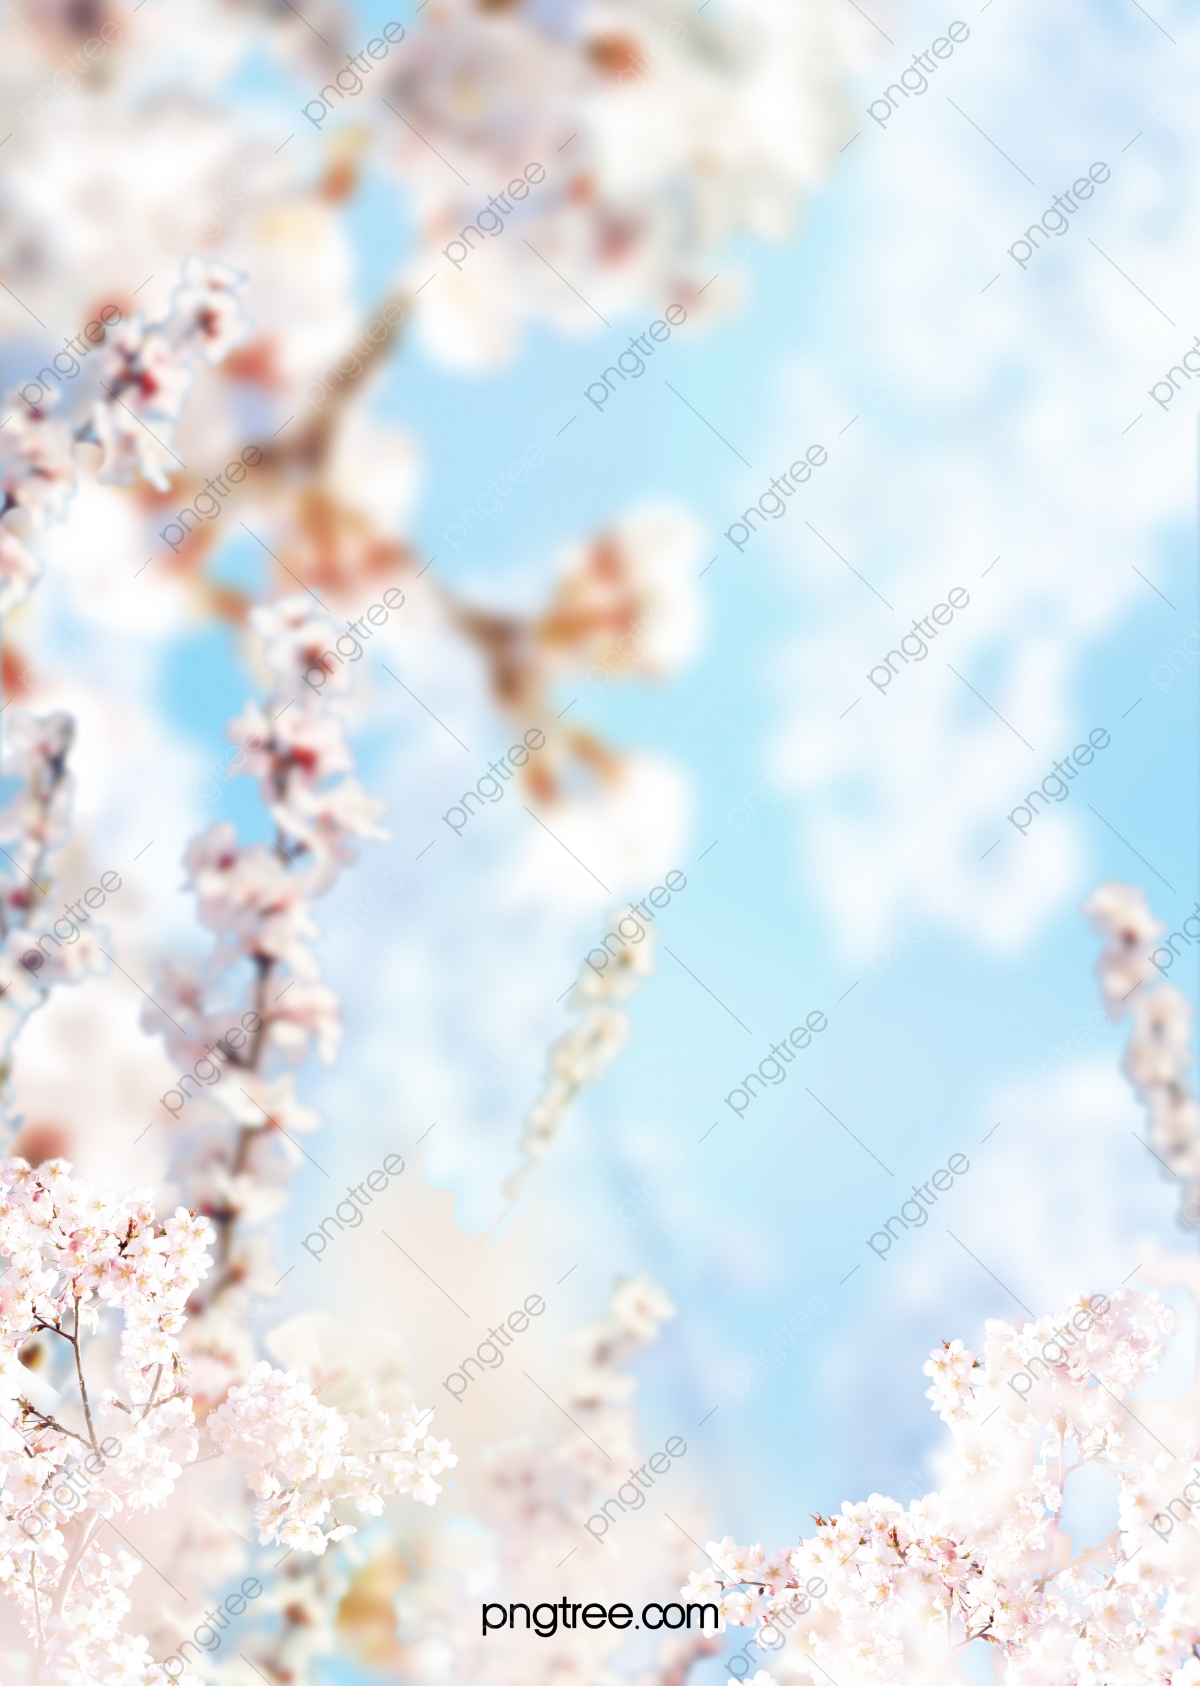 Pastel Cherry Blossom Wallpapers